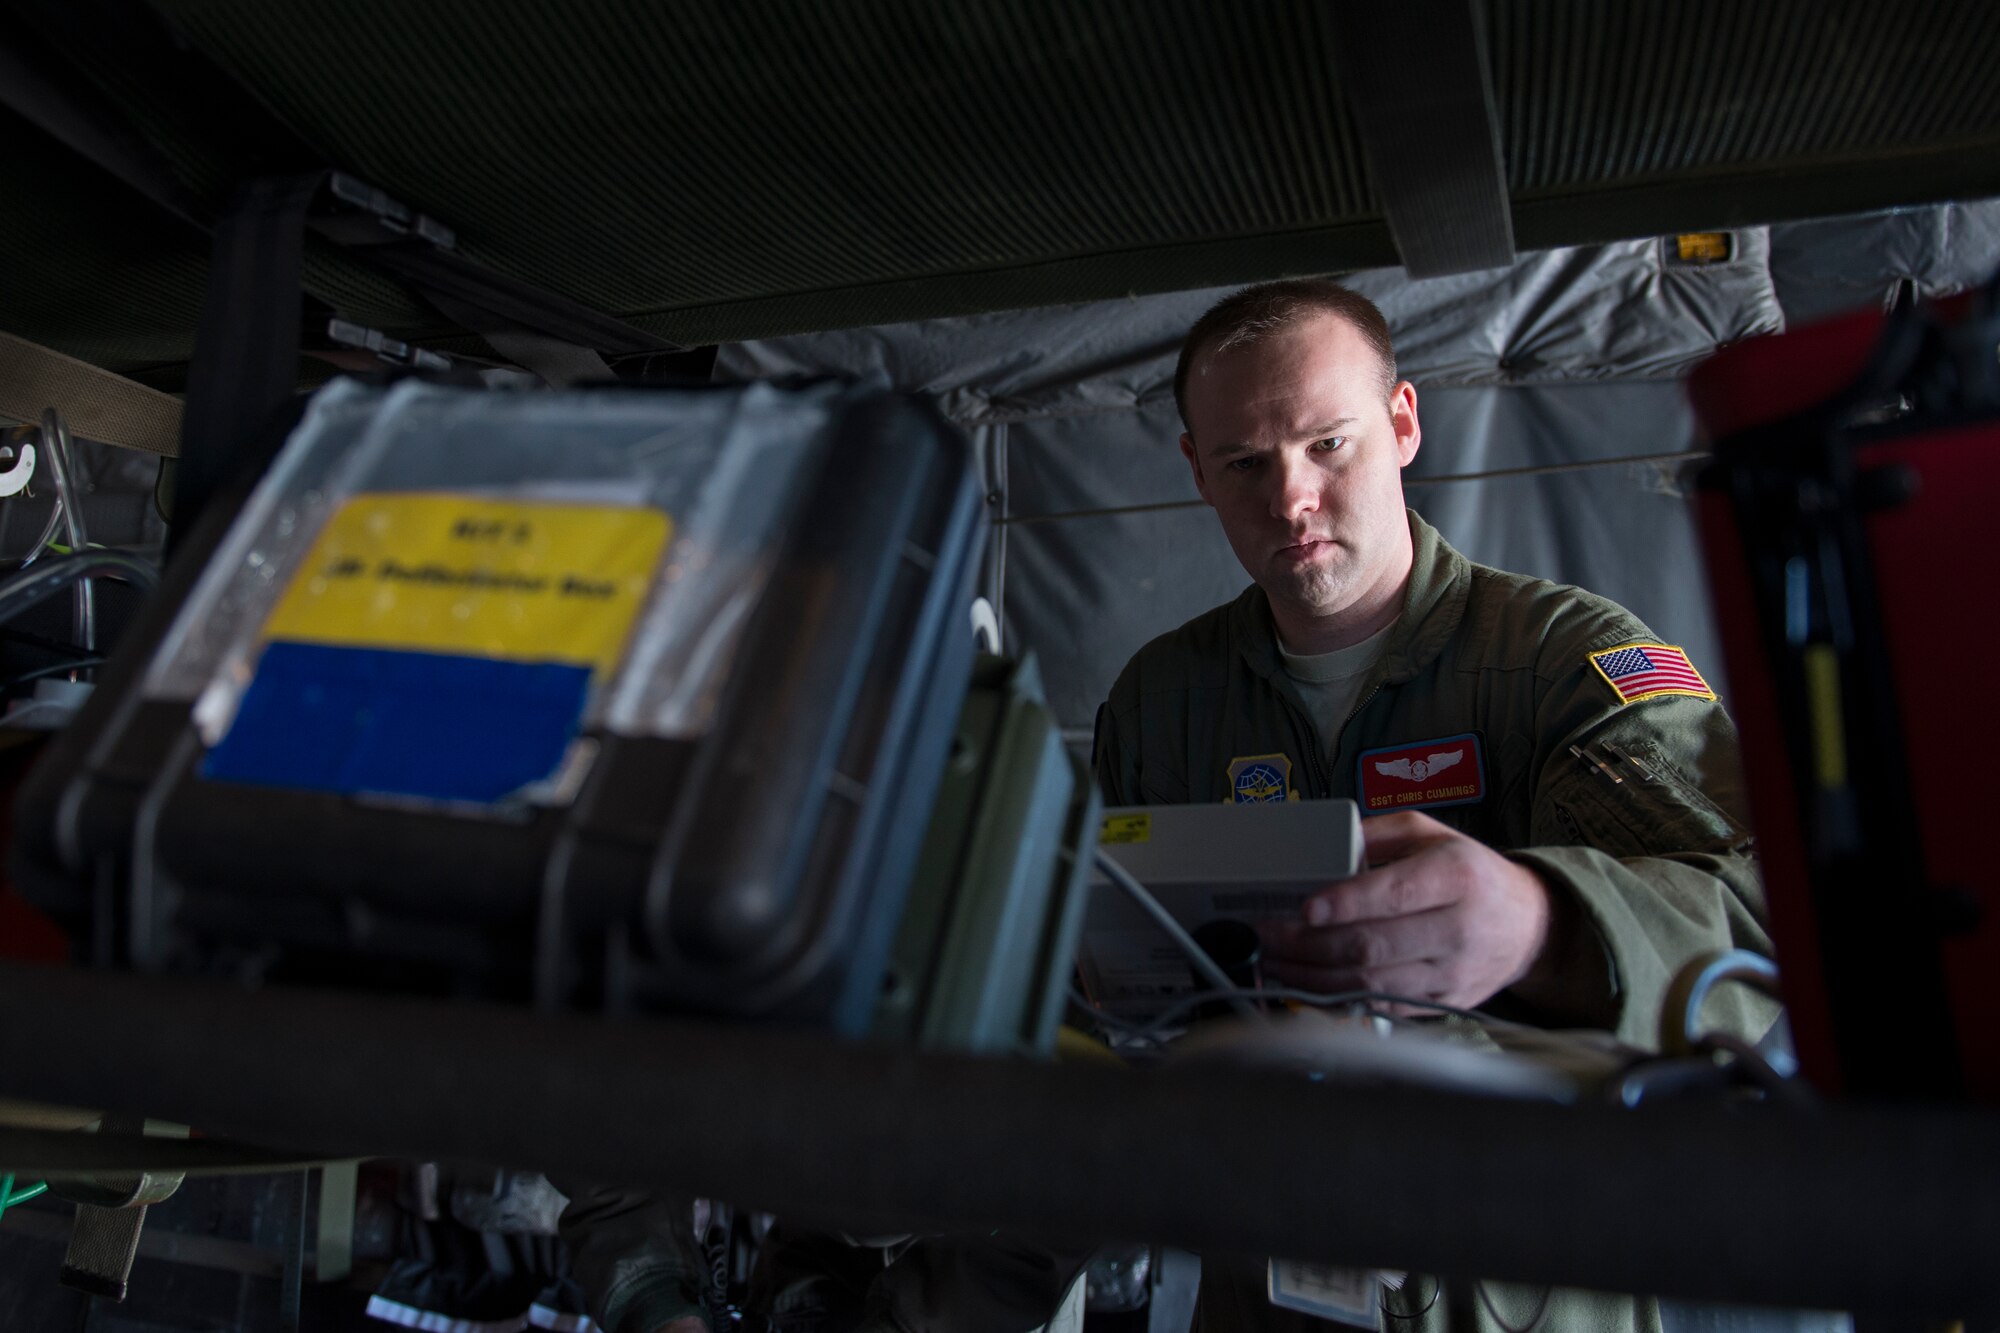 Staff Sgt. Chris Cummings, 375th Aeromedical Evacuation Squadron technician, verifies that medical equipment is functioning properly during training in a simulated C-130 Hercules fuselage Jan. 28, 2016, Scott Air Force Base, Illinois. Trained technicians must set-up the interior of the aircraft and operate medical equipment, while doctors and nurses turn the planes into intensive care units. (U.S. Air Force photo by Airman 1st Class Melissa Estevez)